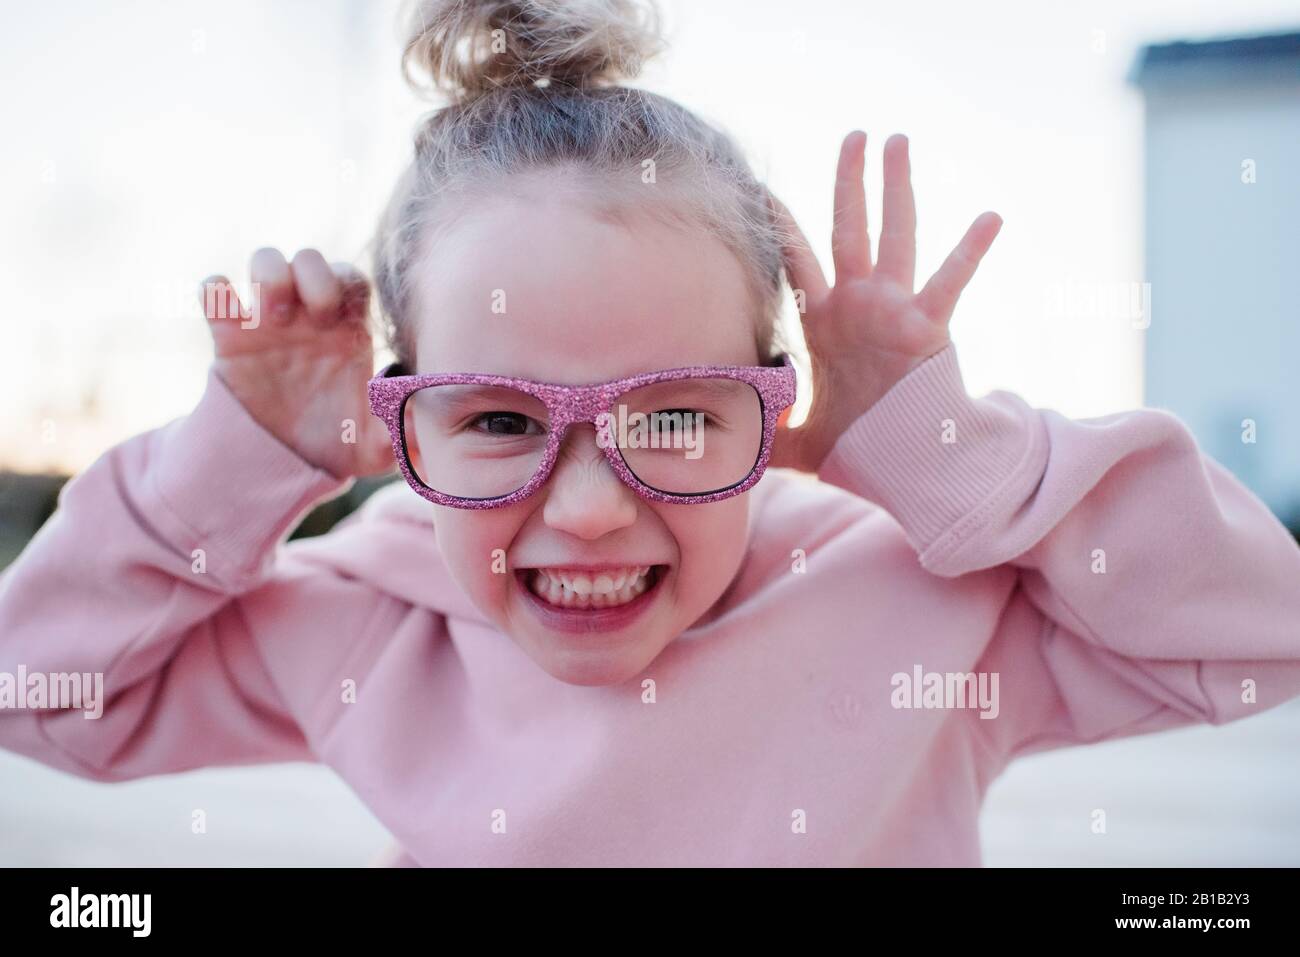 Portrait of a young girl pulling funny faces with pink sparkly glasses Stock Photo